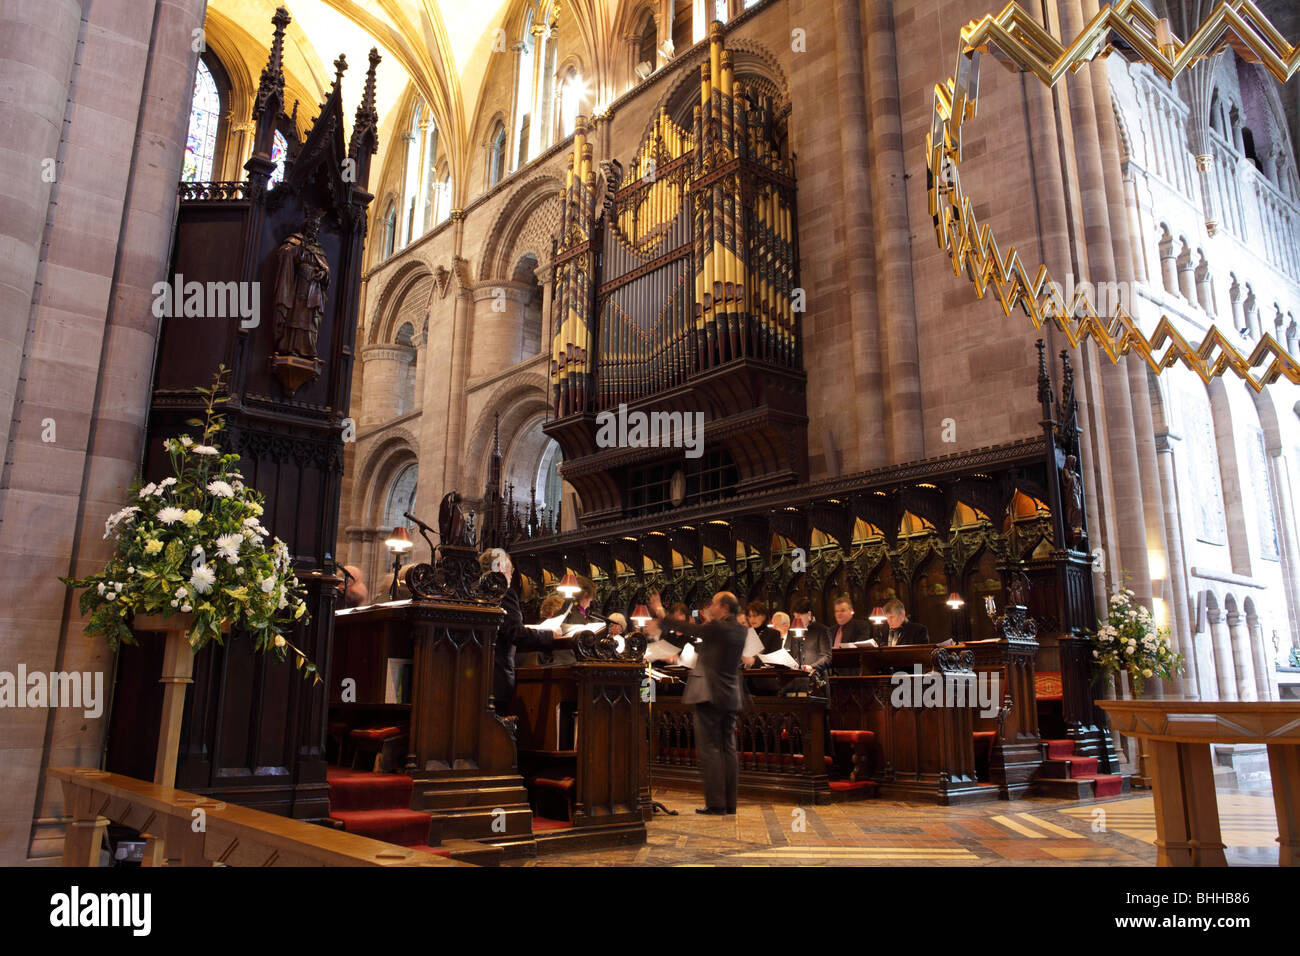 The case designed by Scott and the instrument designed by Henry Willis, the organ dominates the Choir at Hereford Cathedral. Stock Photo